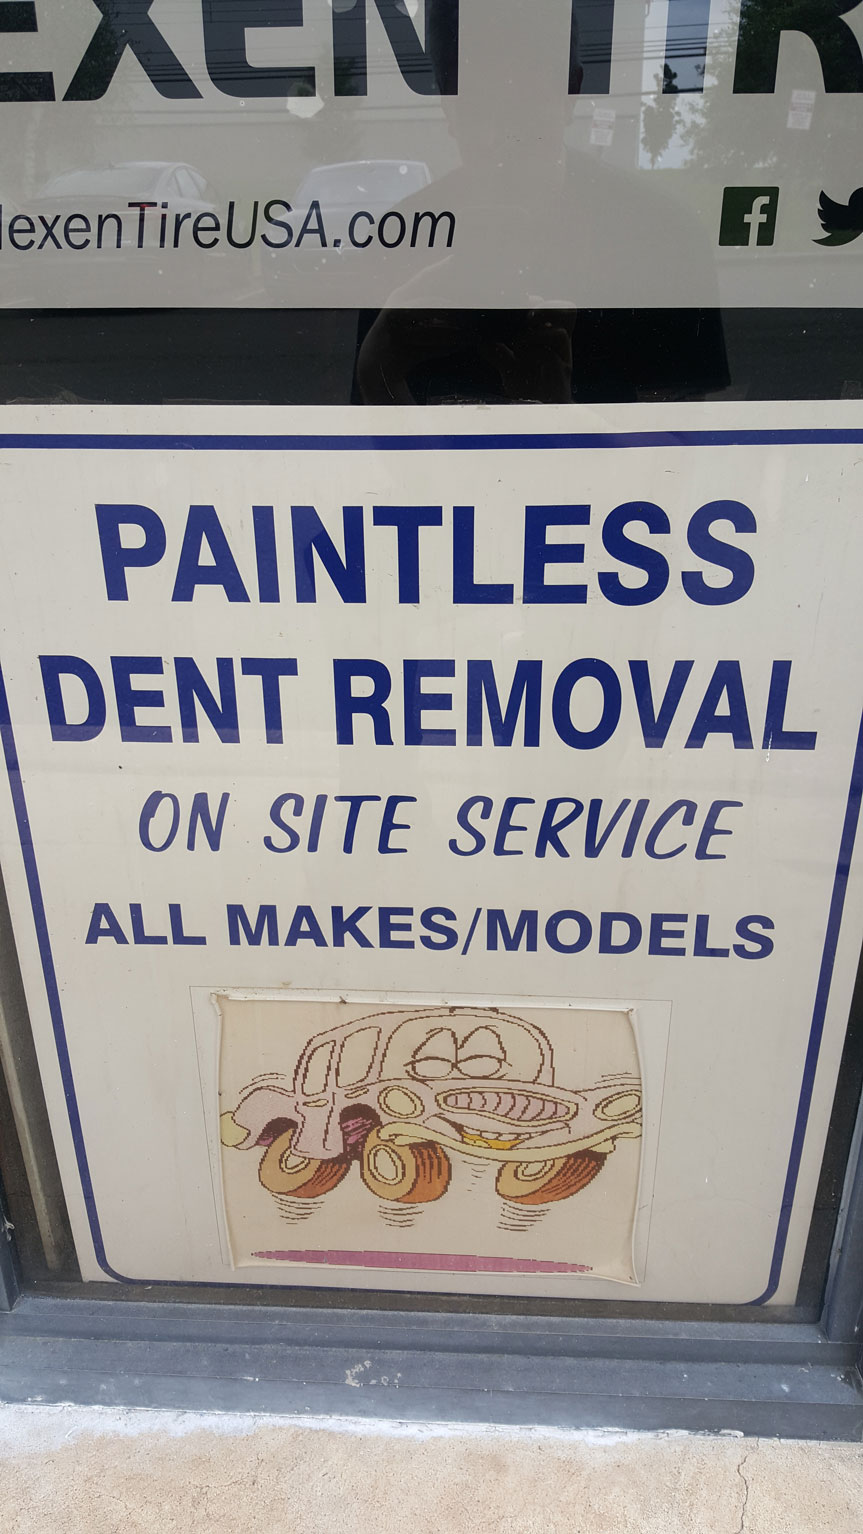 A poster advertising Paintless Dent Removal, affixed to a glass door, promoting the service offered